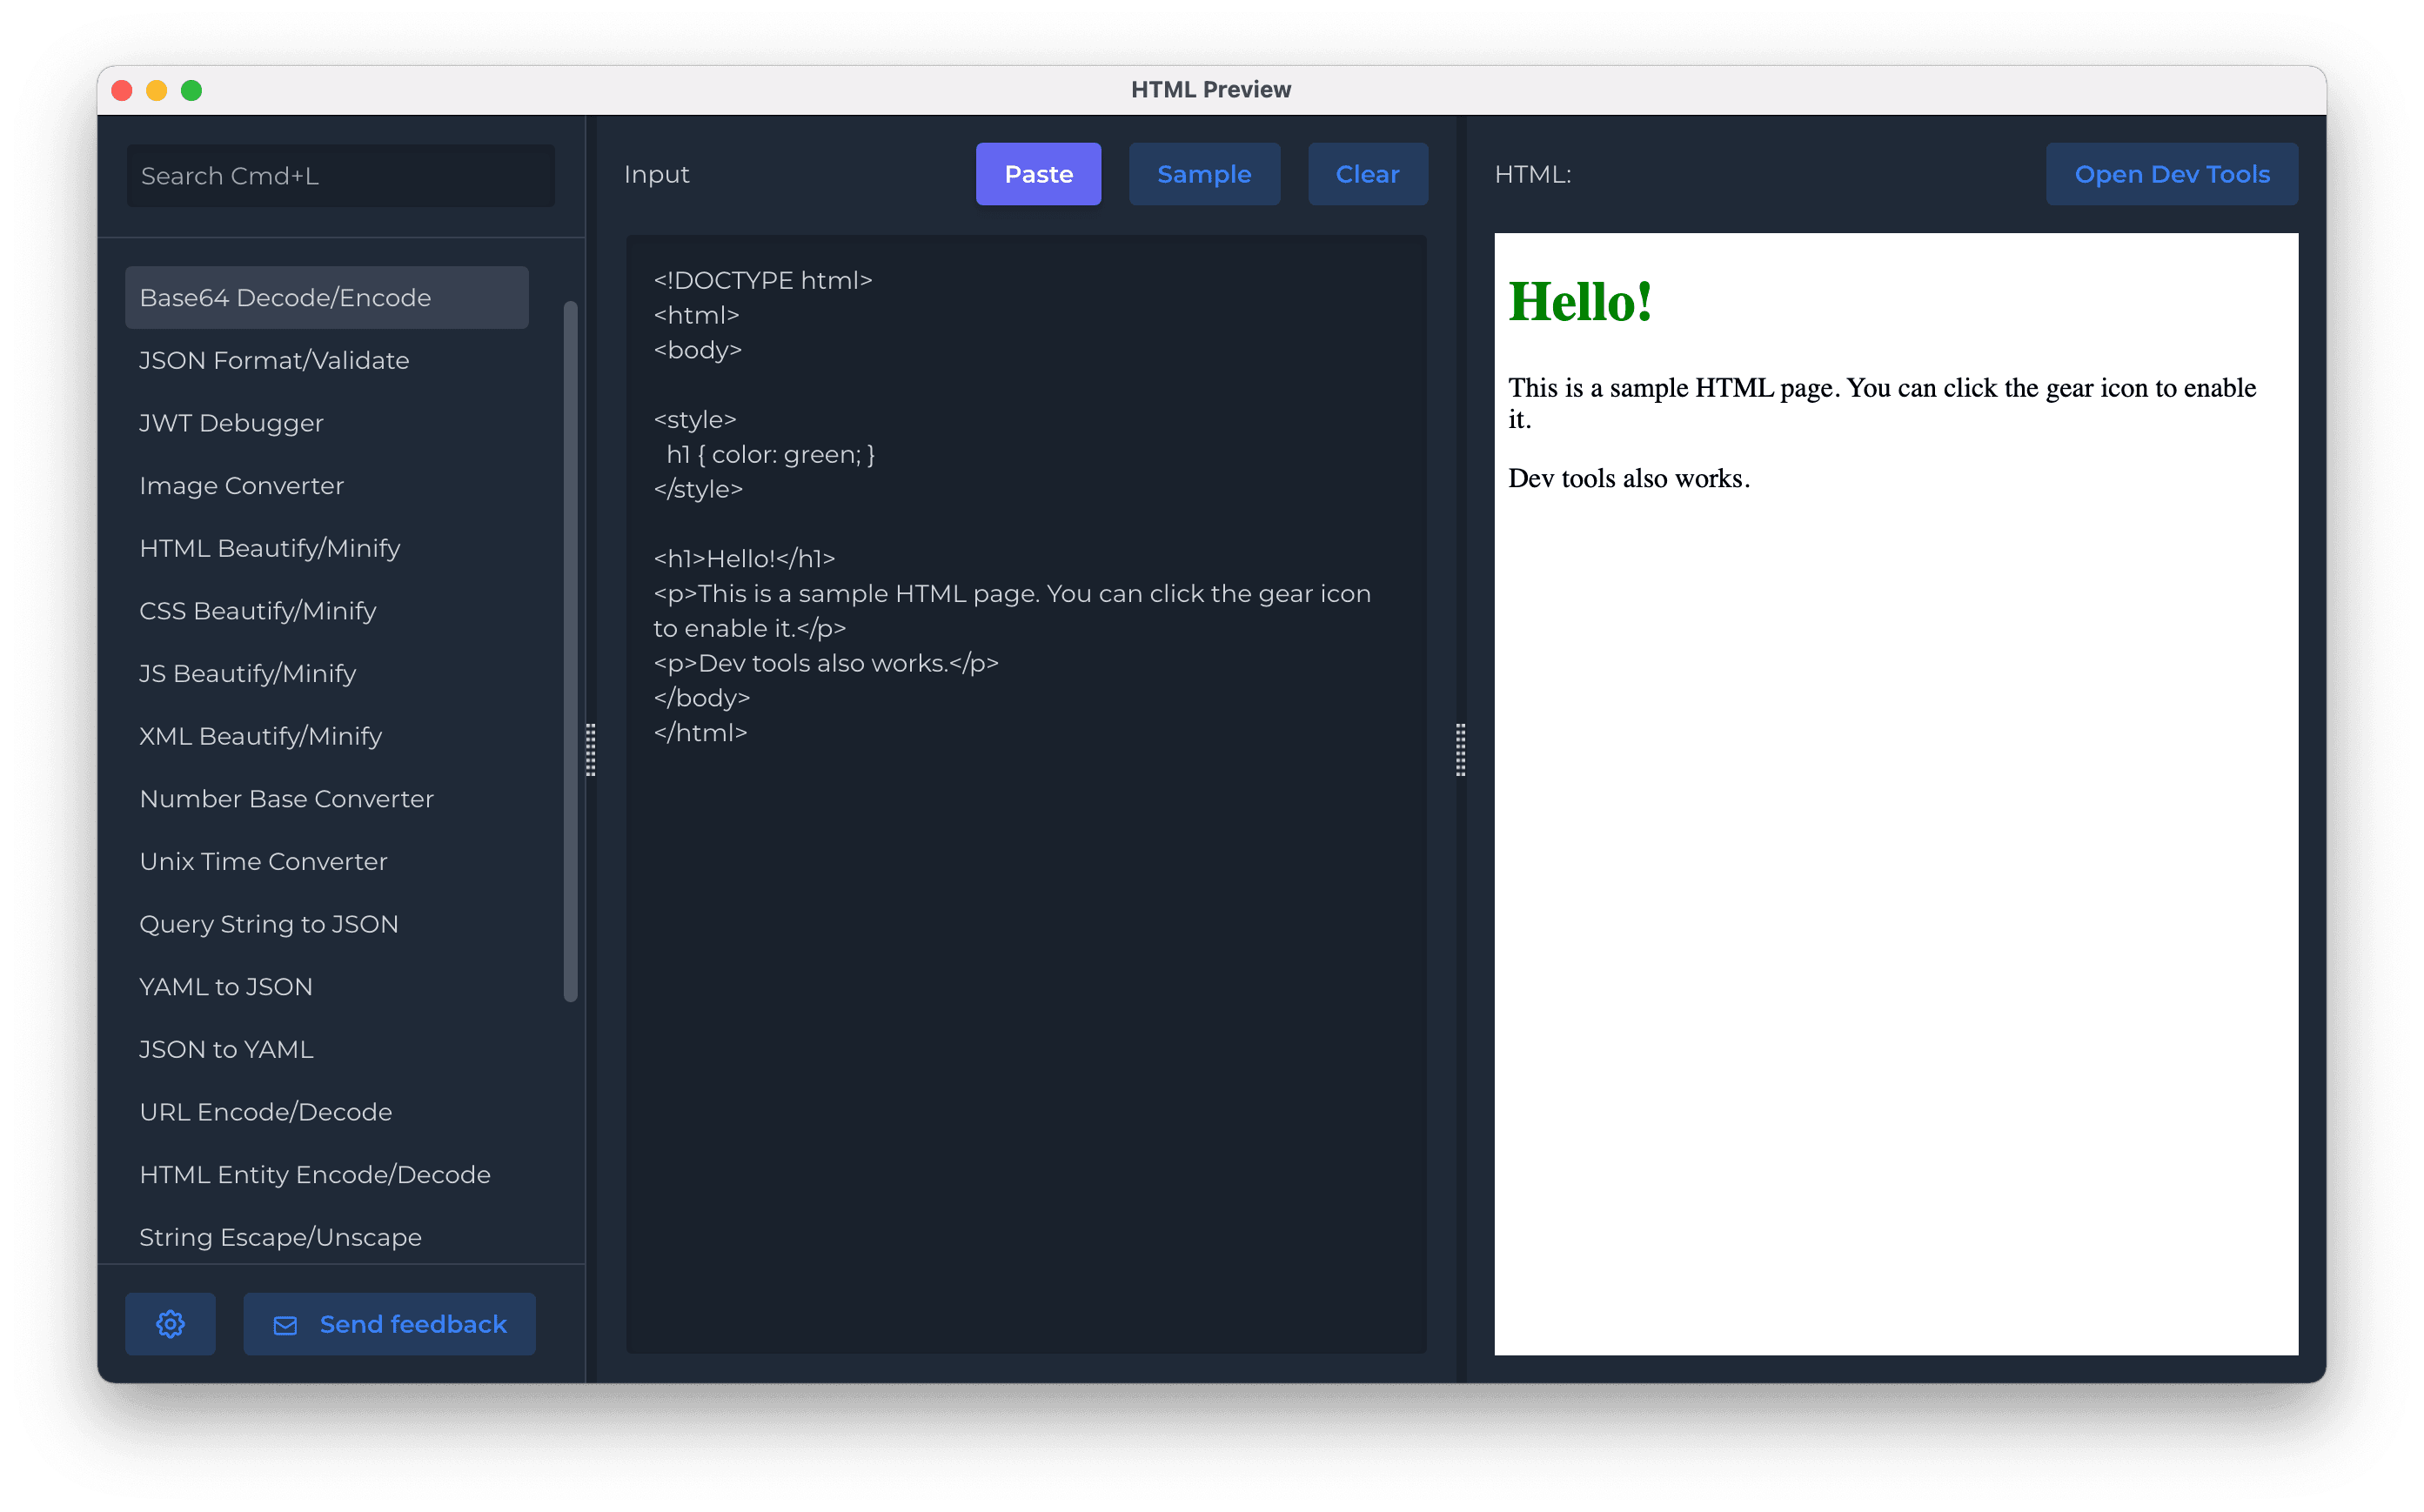 HTML Preview